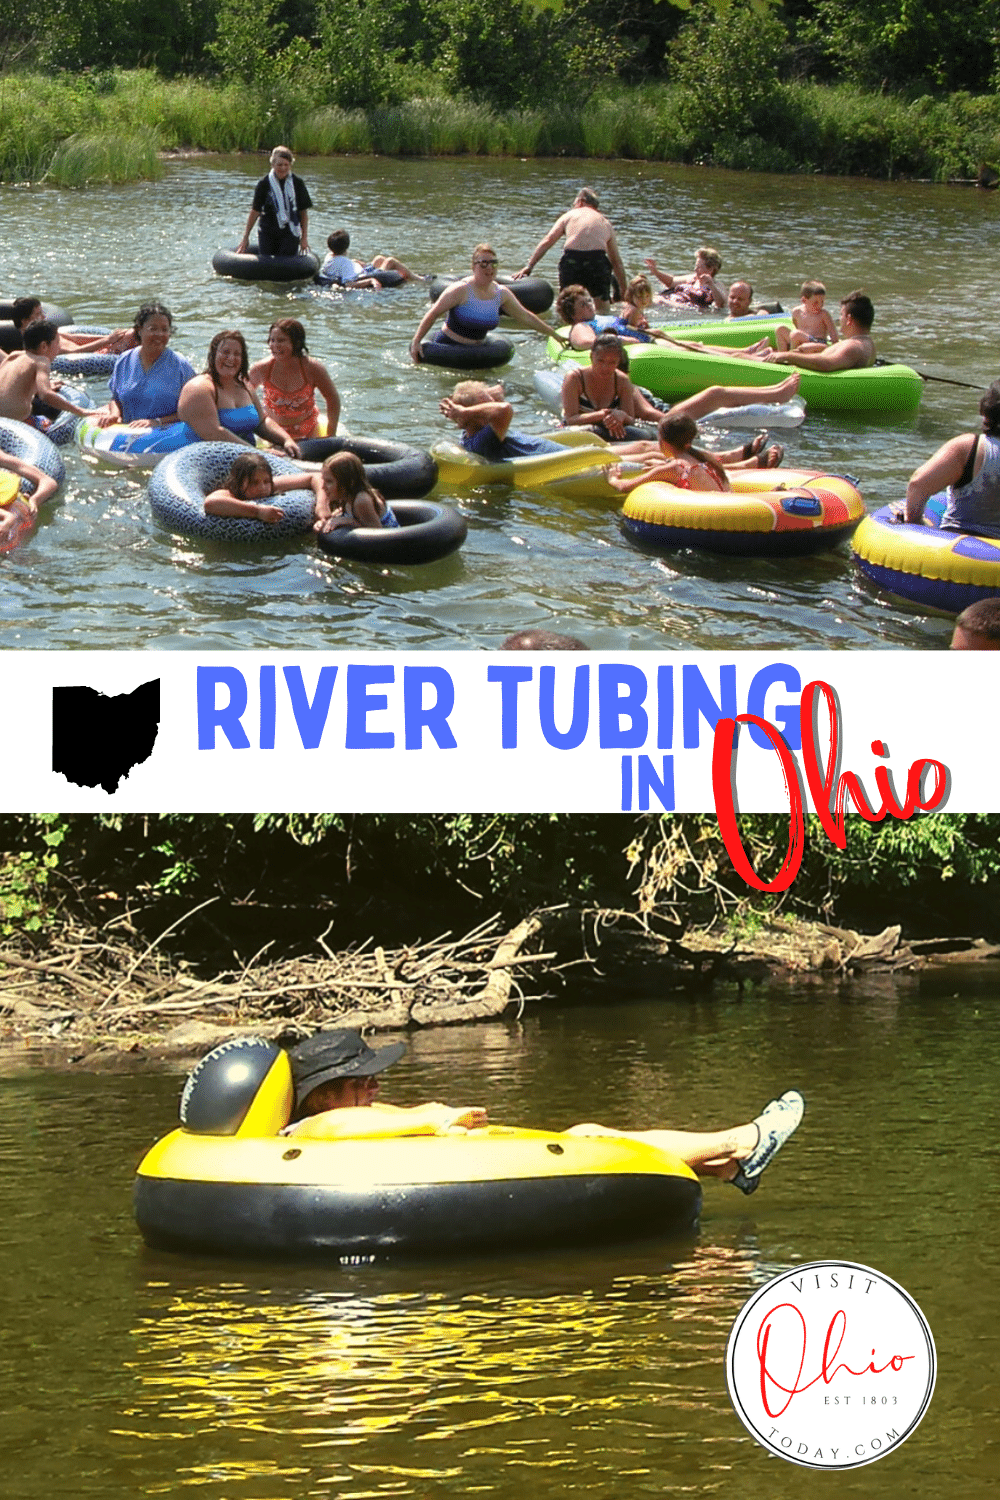 There are lots of opportunities for river tubing in Ohio. River tubing is a fantastic way to spend those gorgeous, lovely sunny days in Ohio. River tubing can be relaxed and leisurely, or it can be wild and rugged, but it is always fun!